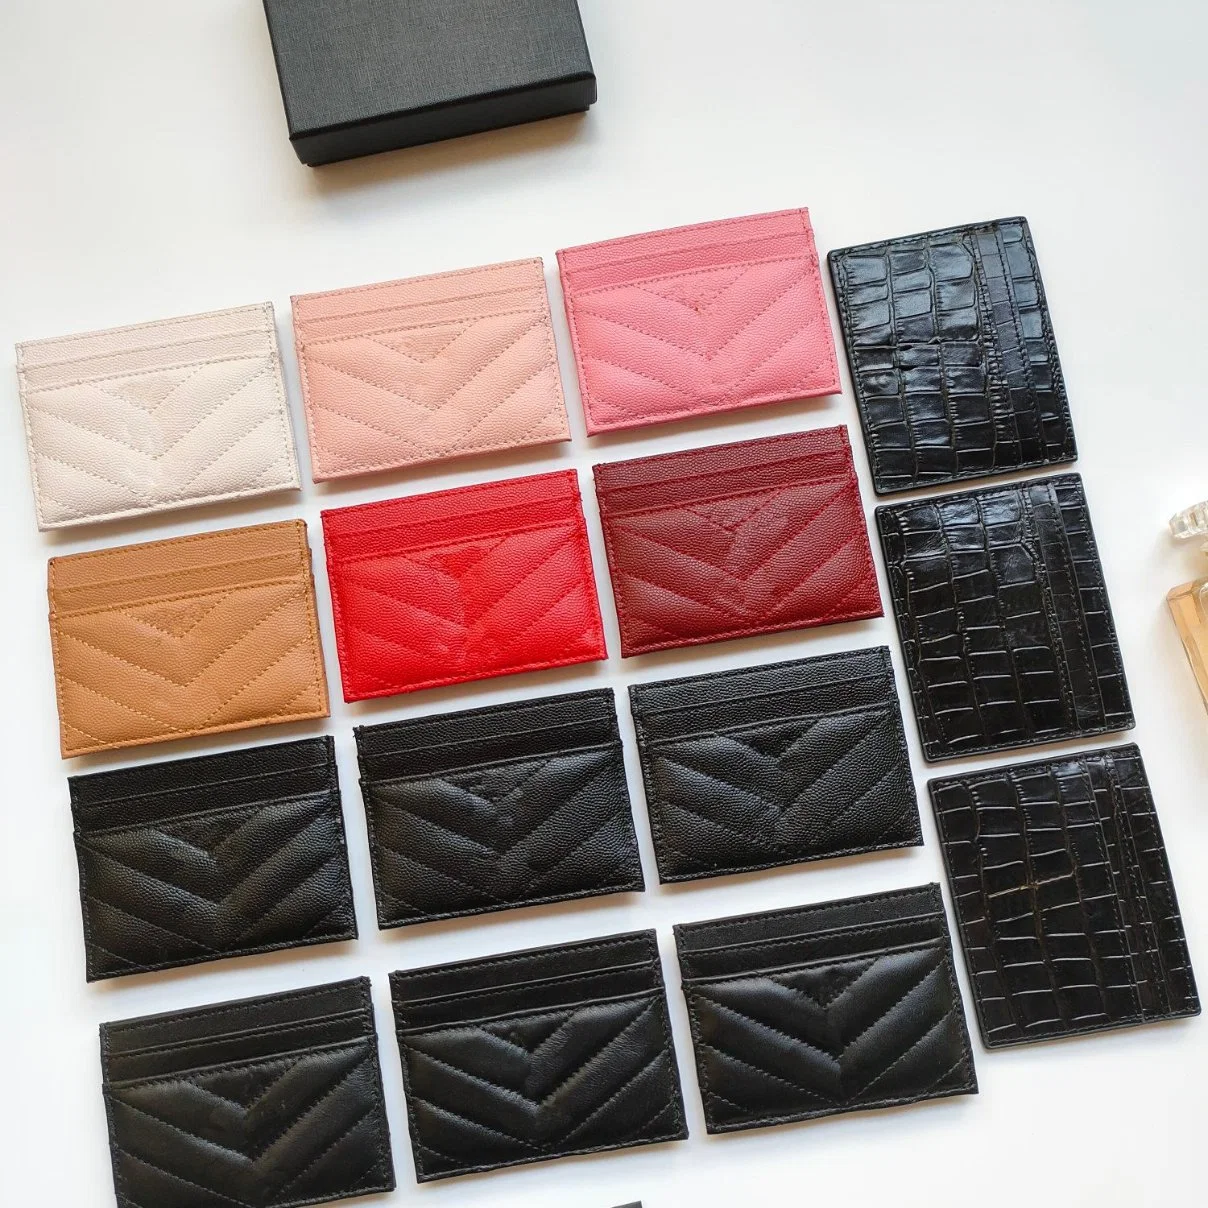 New Luxury Designer Purse Brand Card Holders Caviar Woman Mini Wallet Designer Pure Color Genuine Leather Pebble Texture Luxury Black Wallet with Box